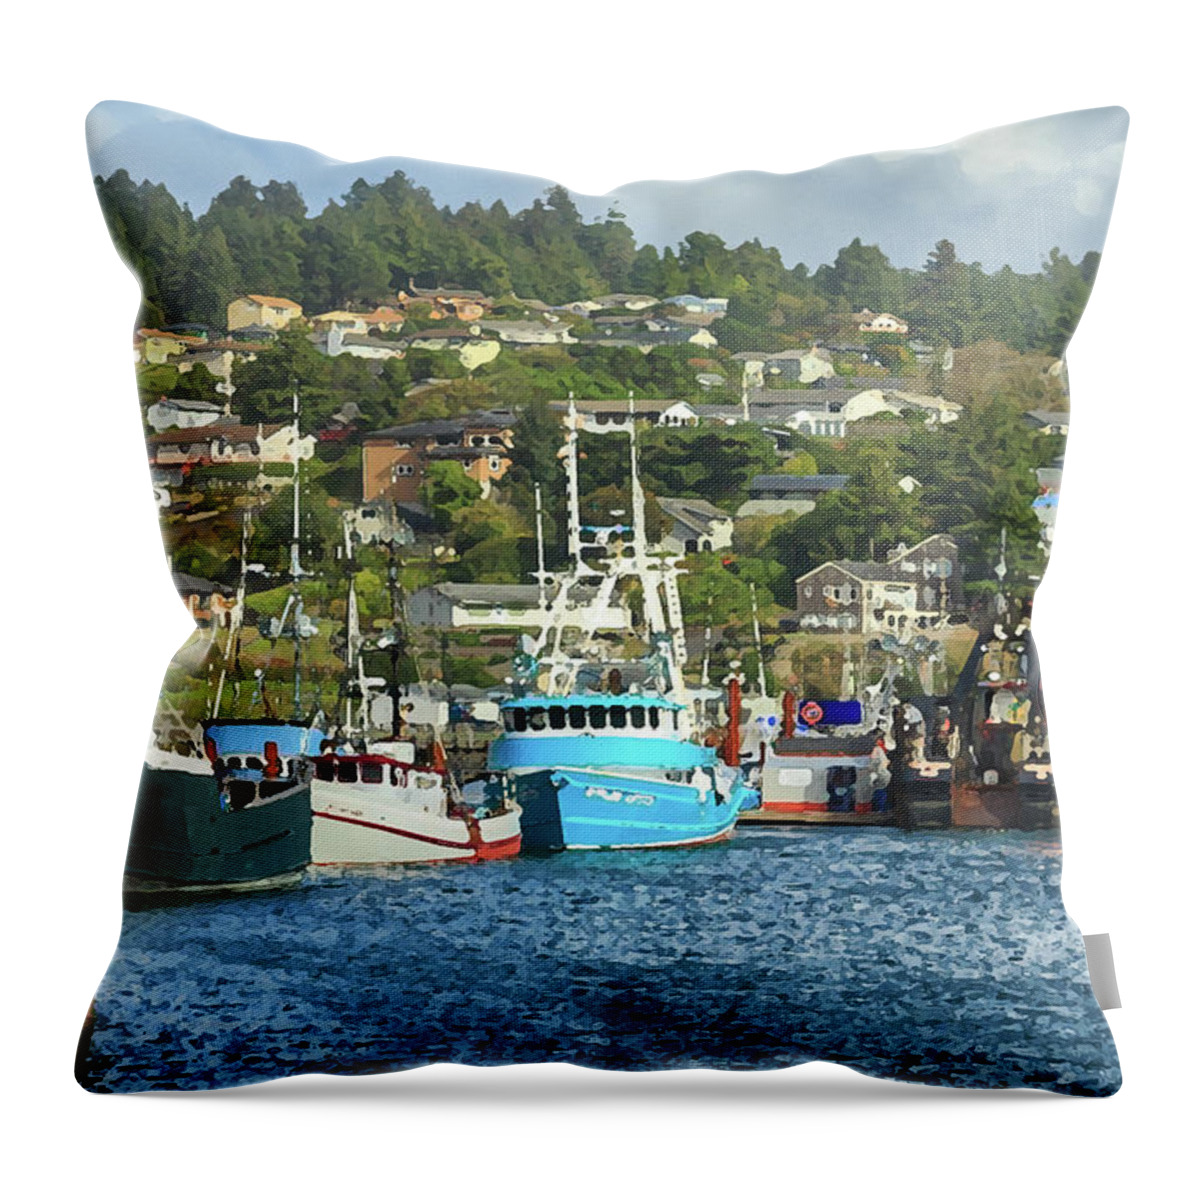 Boats Throw Pillow featuring the digital art Newport Harbor by James Eddy